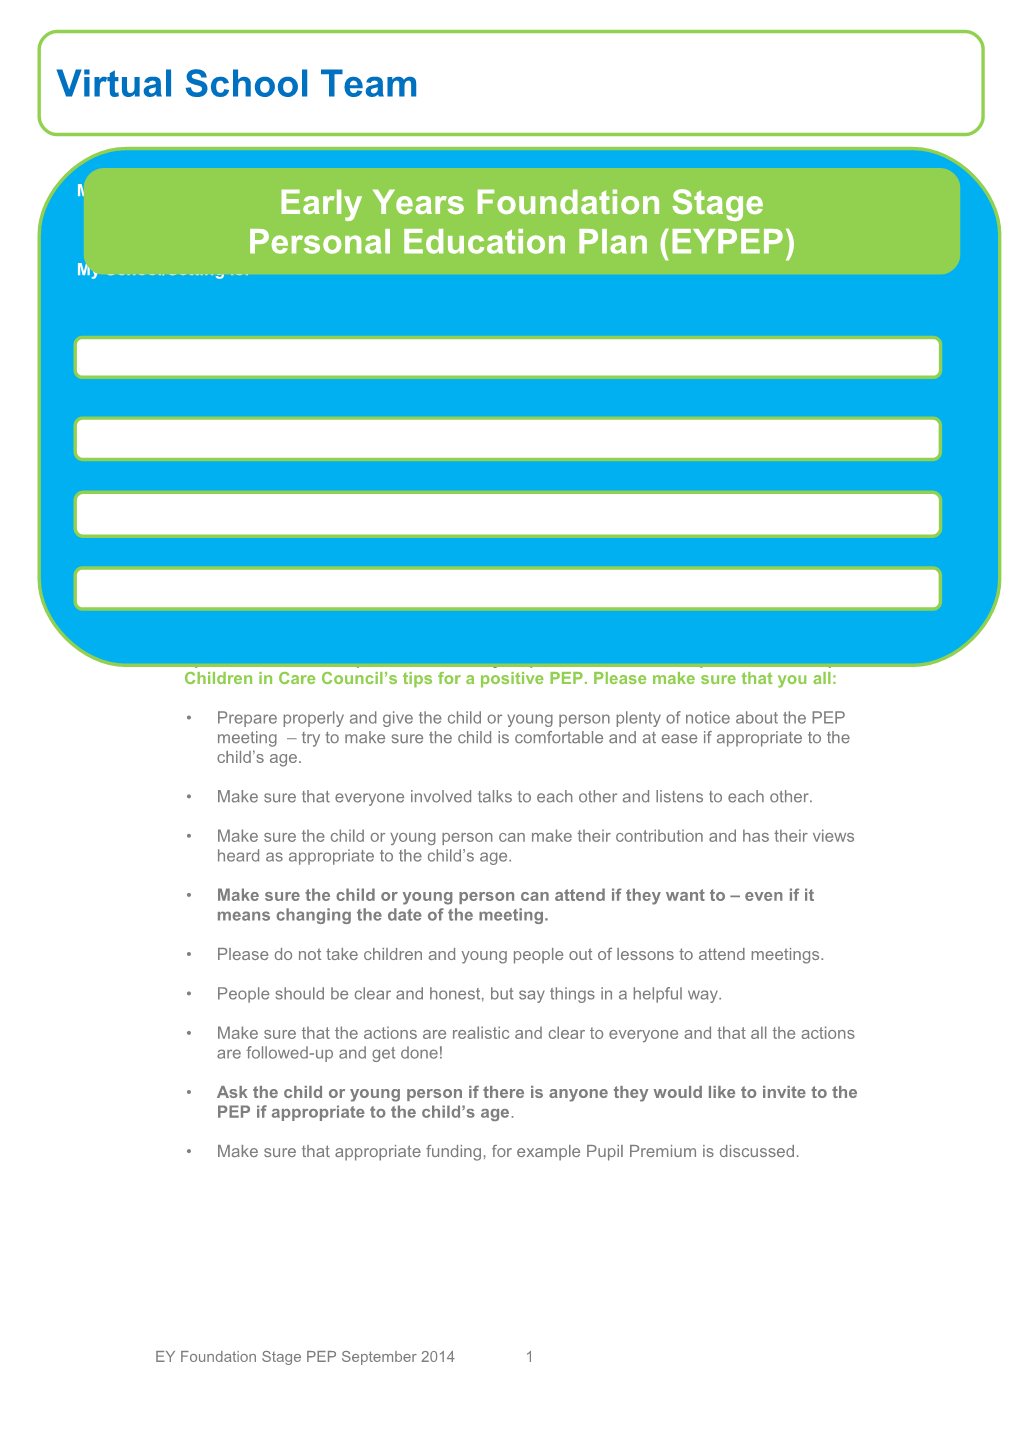 The Personal Education Plan Is a Statutory Requirement and a Vital Part of the Care Plan